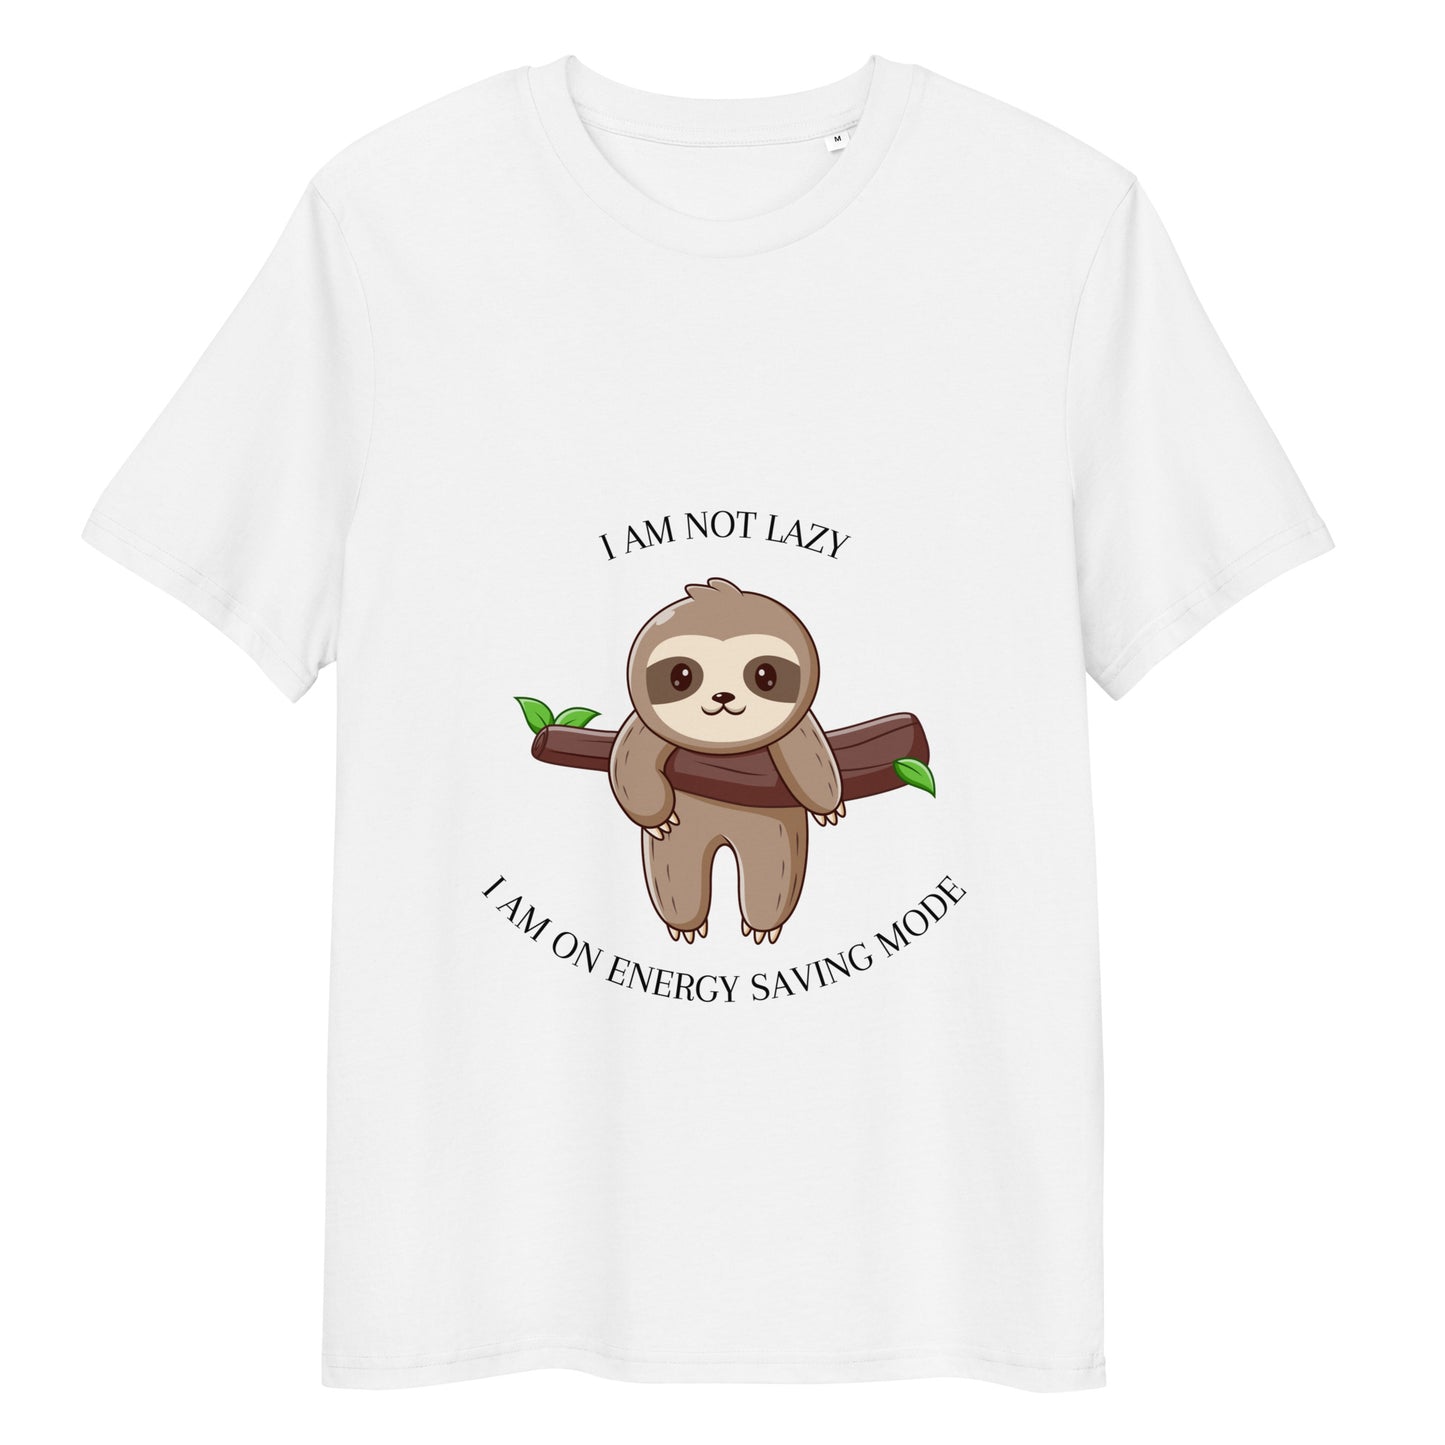 Energy Saving Mode, Chill Vibes, Relaxation, Lazy Day, Comfort, Style, Branch, Animal, Lazy, Sloth, Nature, Cute, Adorable, Innocent, Unisex